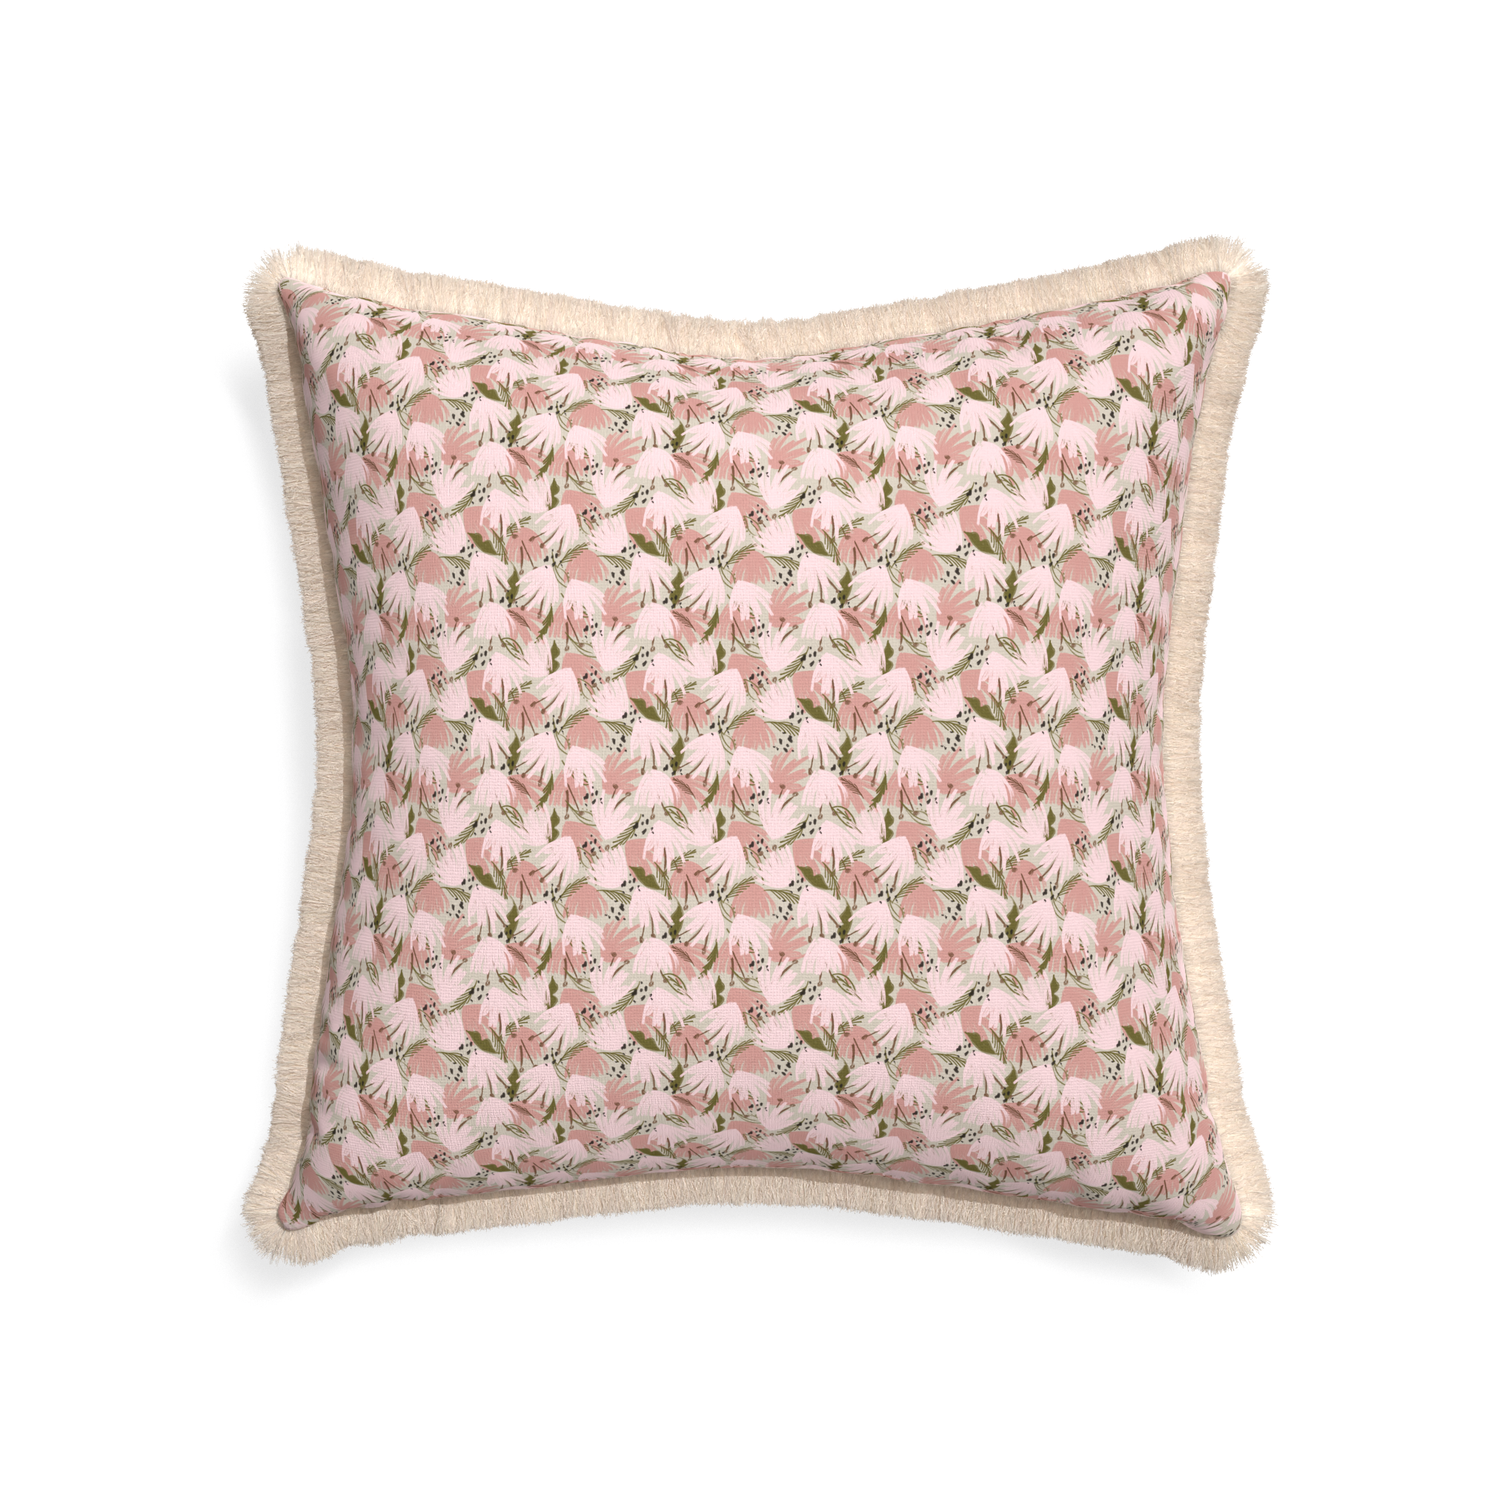 22-square eden pink custom pink floralpillow with cream fringe on white background